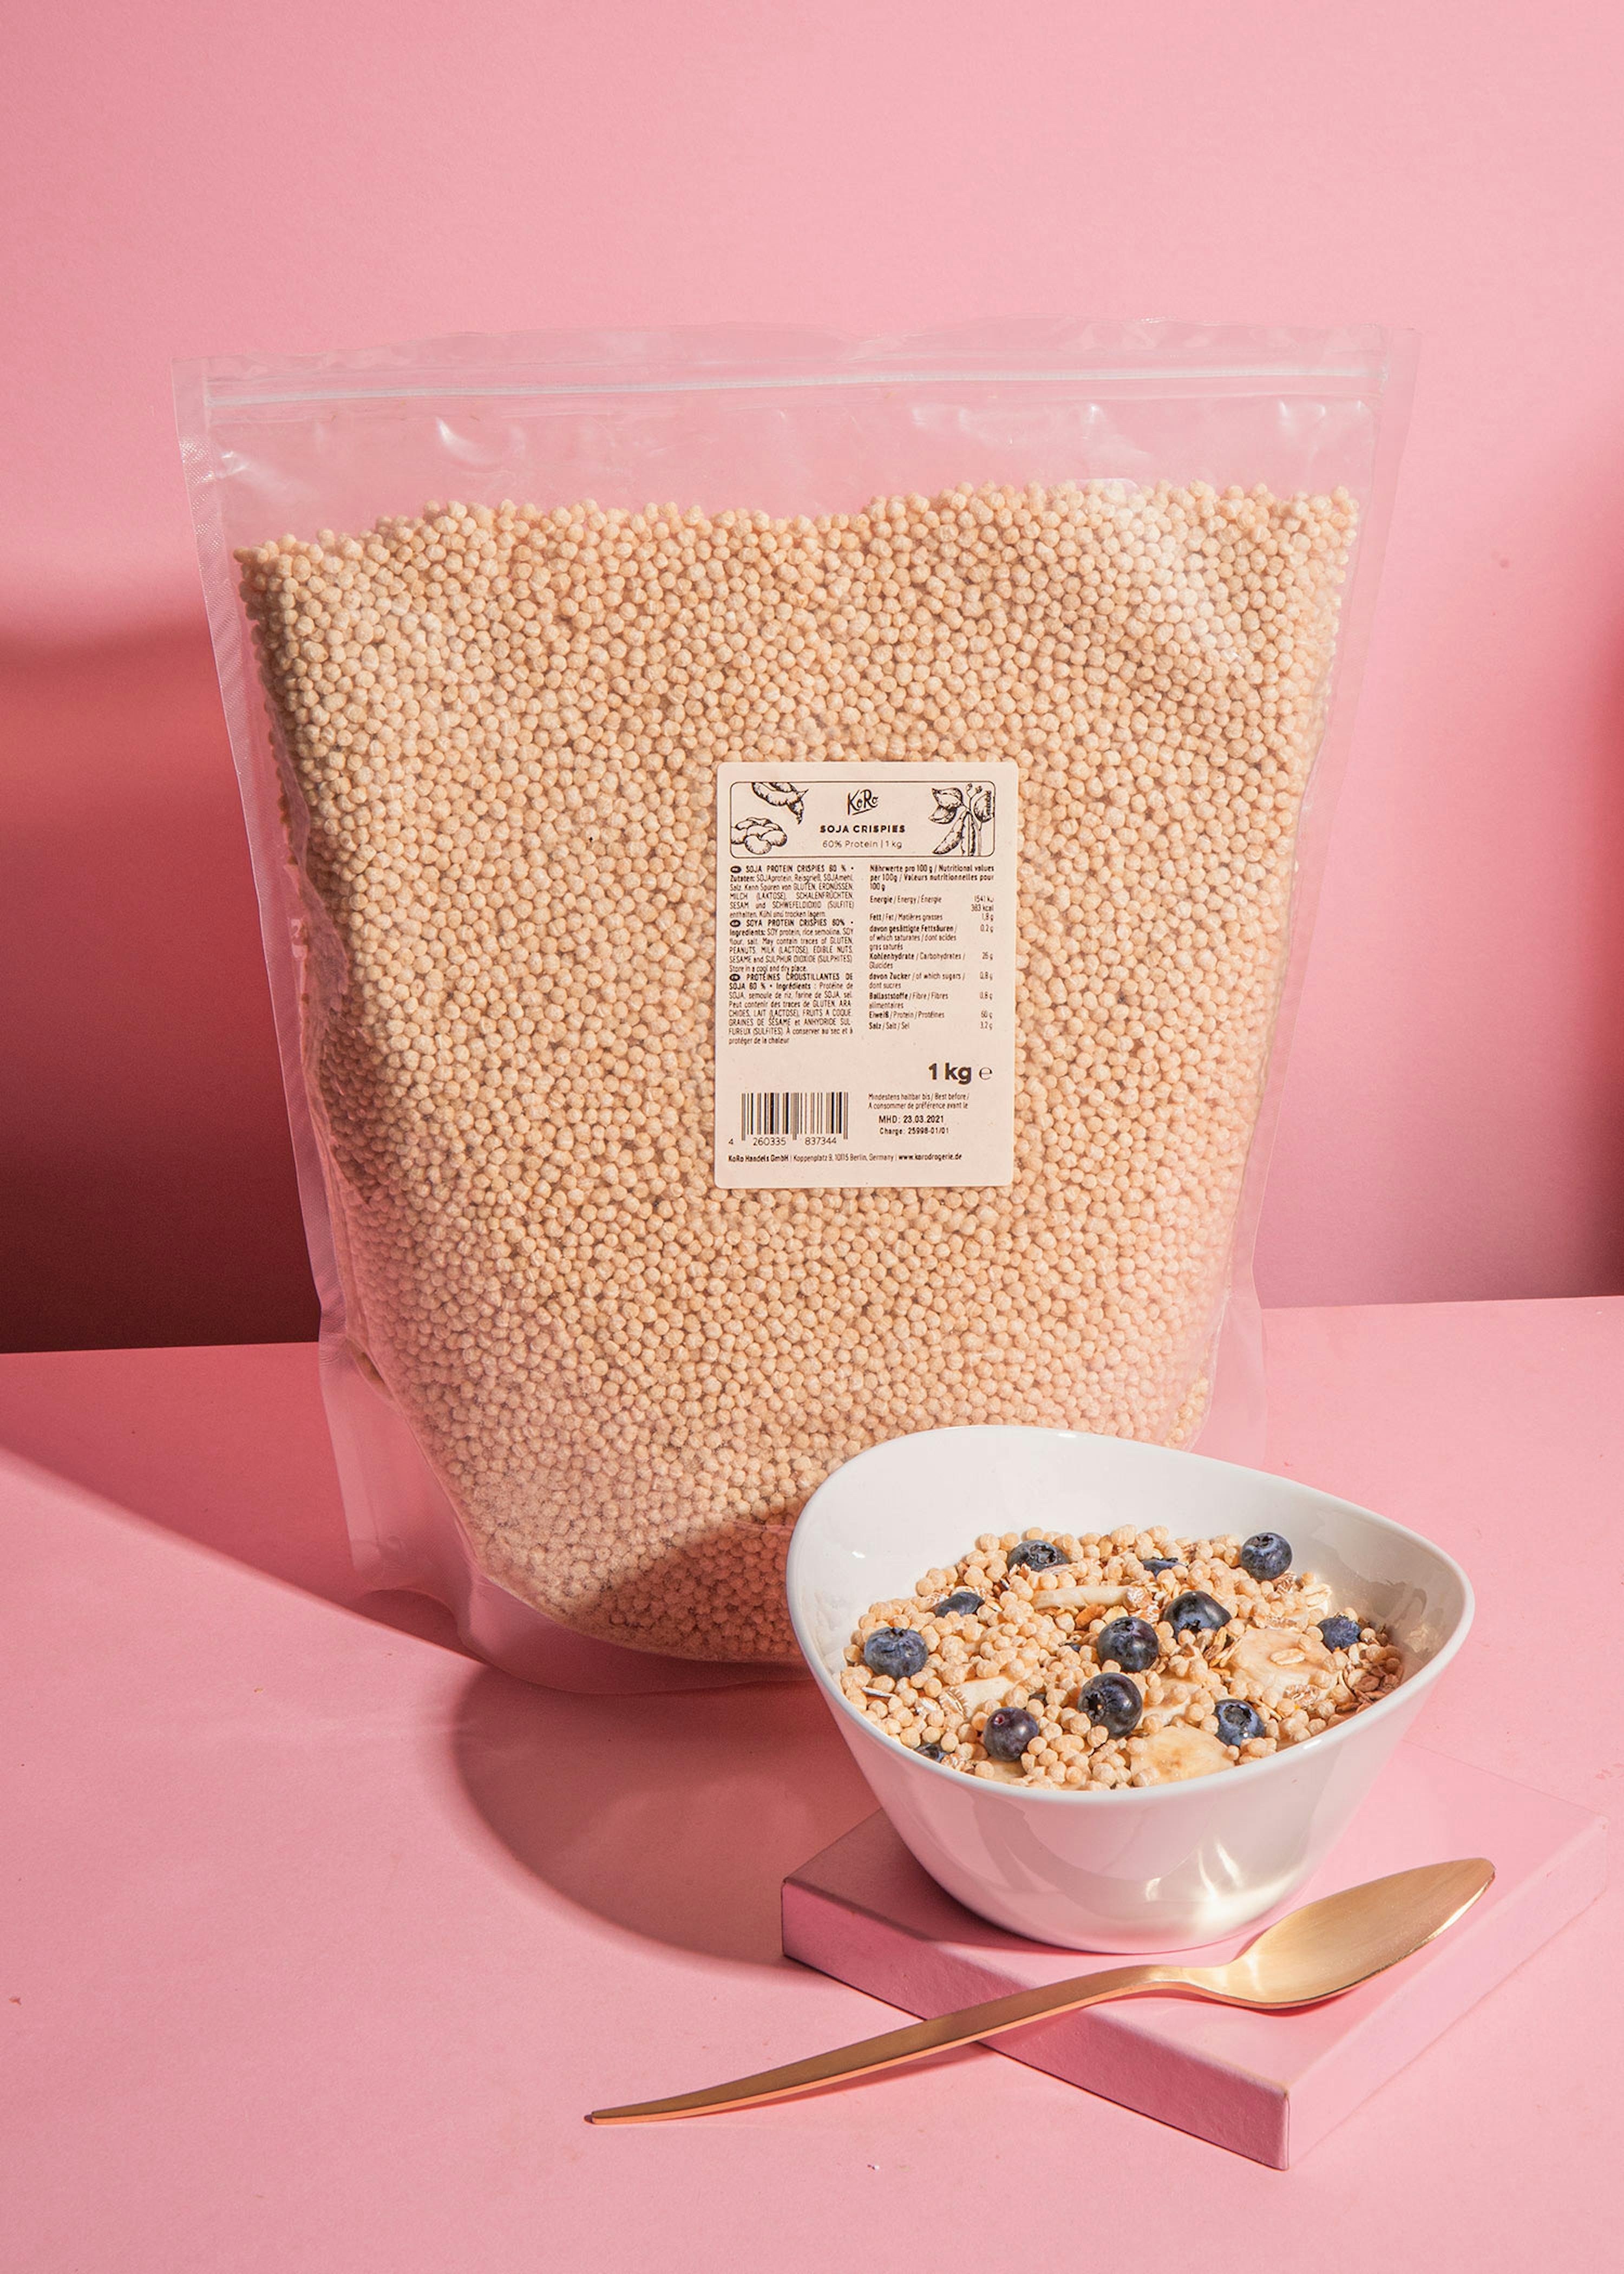 Private Label Soy Protein Crispies 58% with Cocoa at KoRo Source